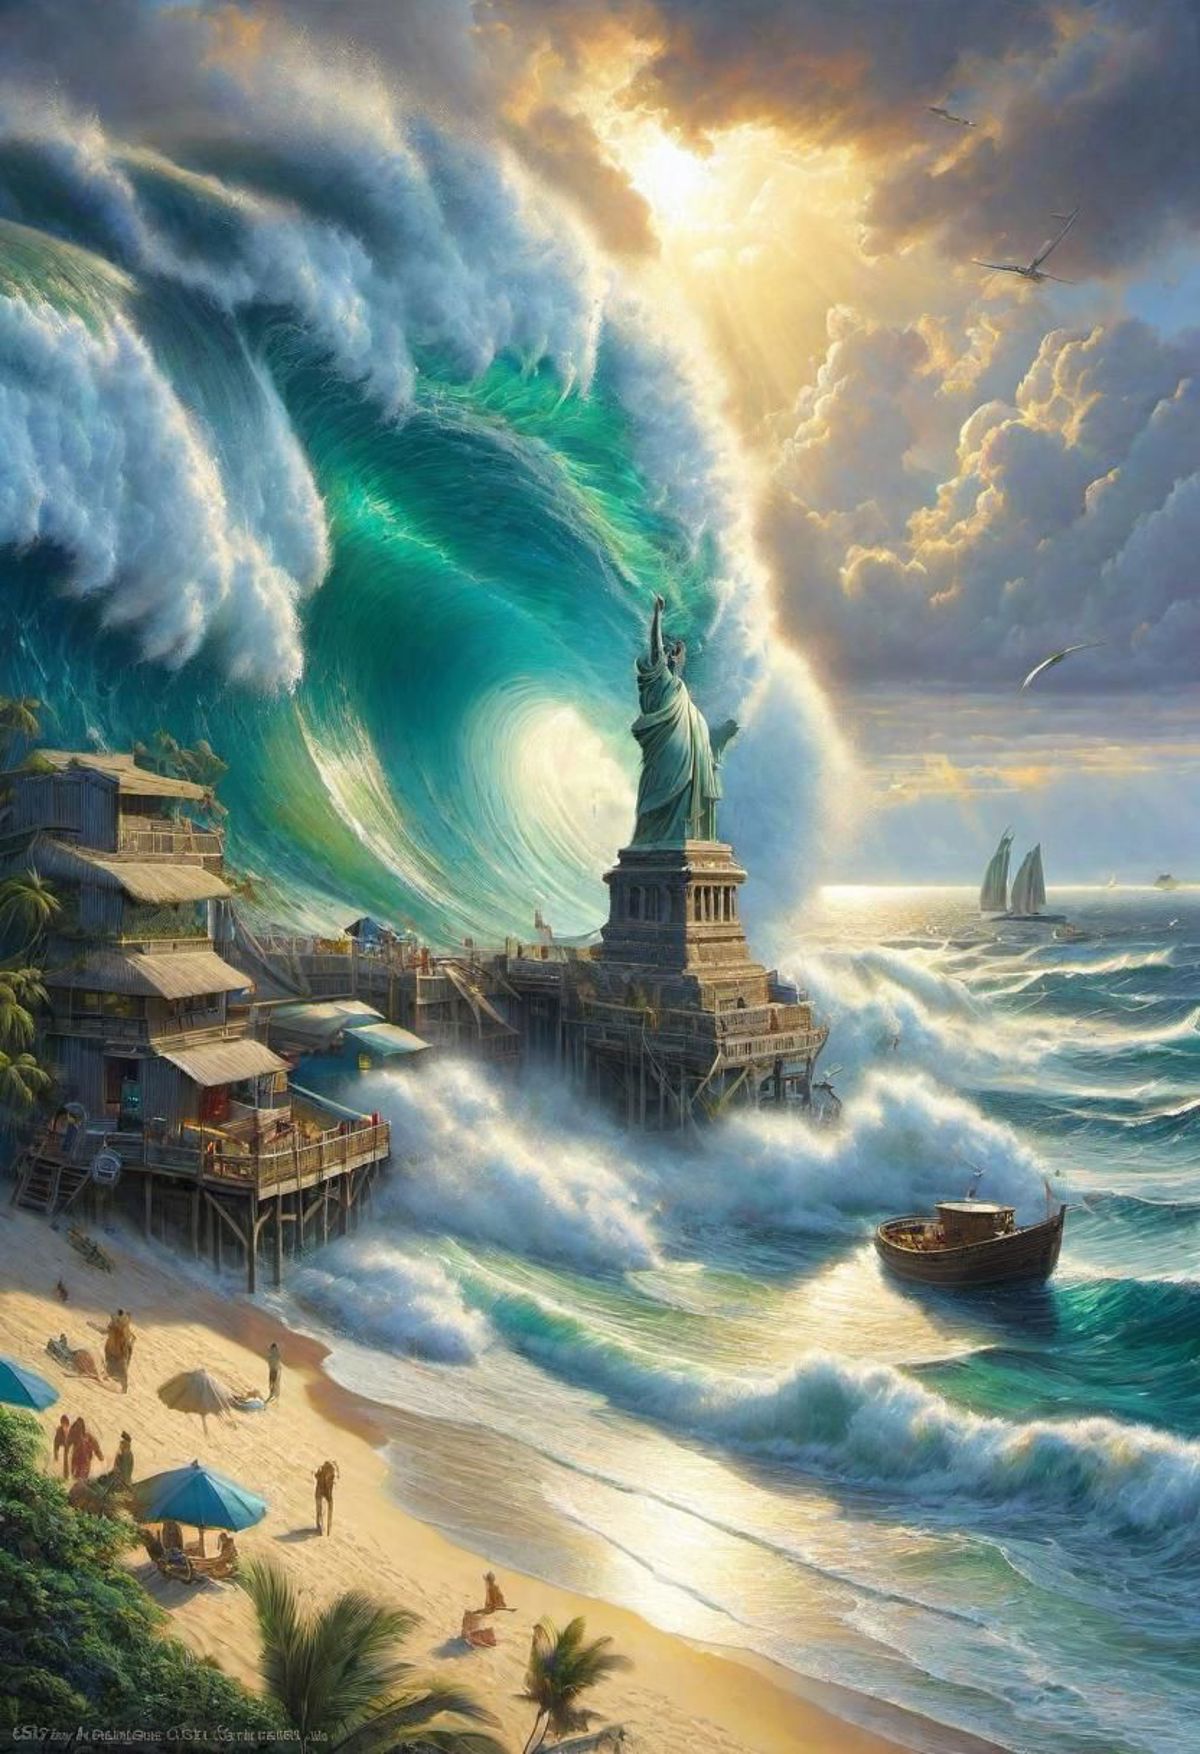 A painting of a huge wave crashing into a statue of liberty and a boat.